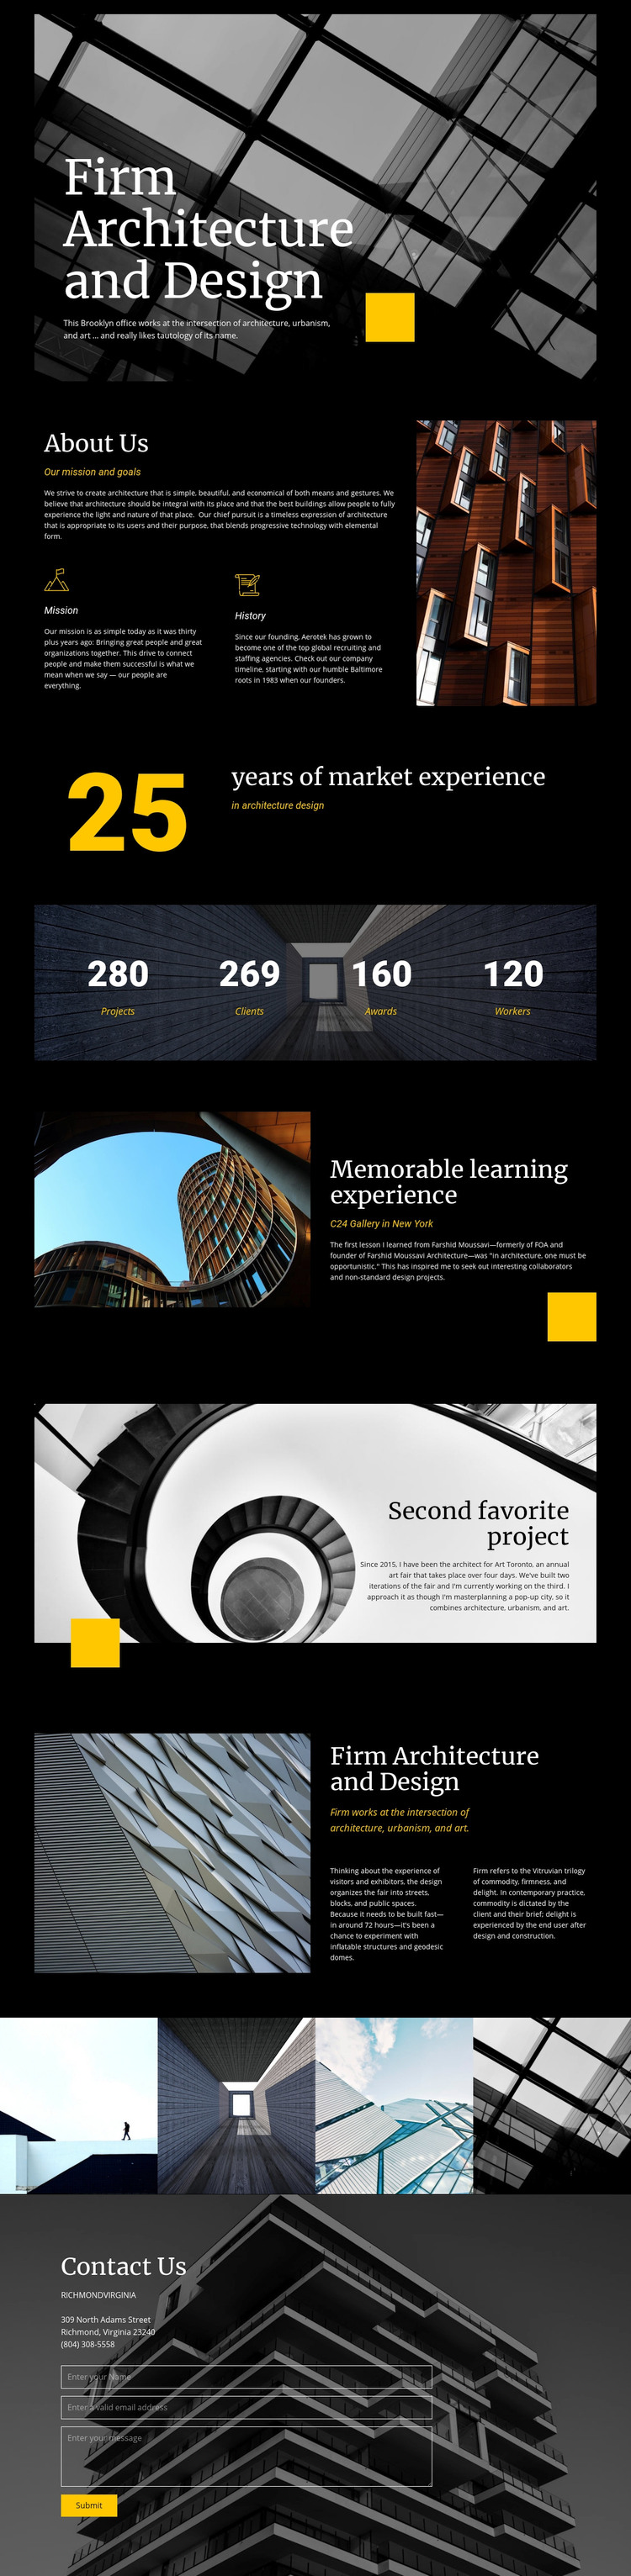 Firm architecture and Design WordPress Website